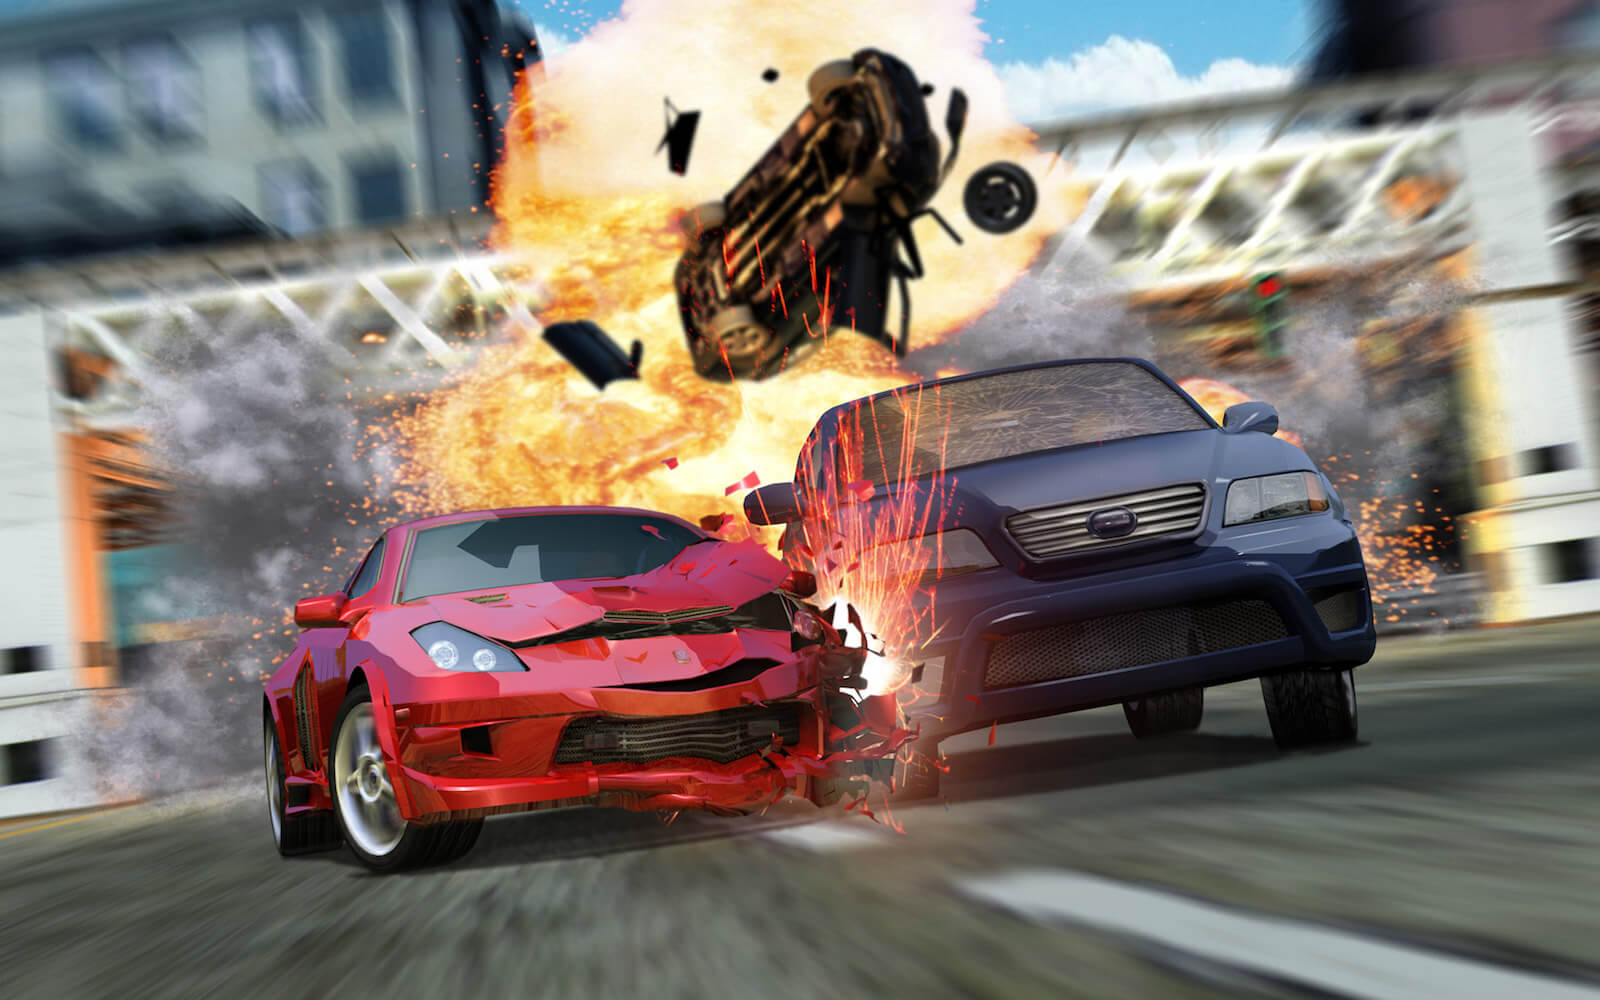 Burnout 3: Takedown / Revenge - The Cane and Rinse videogame podcast